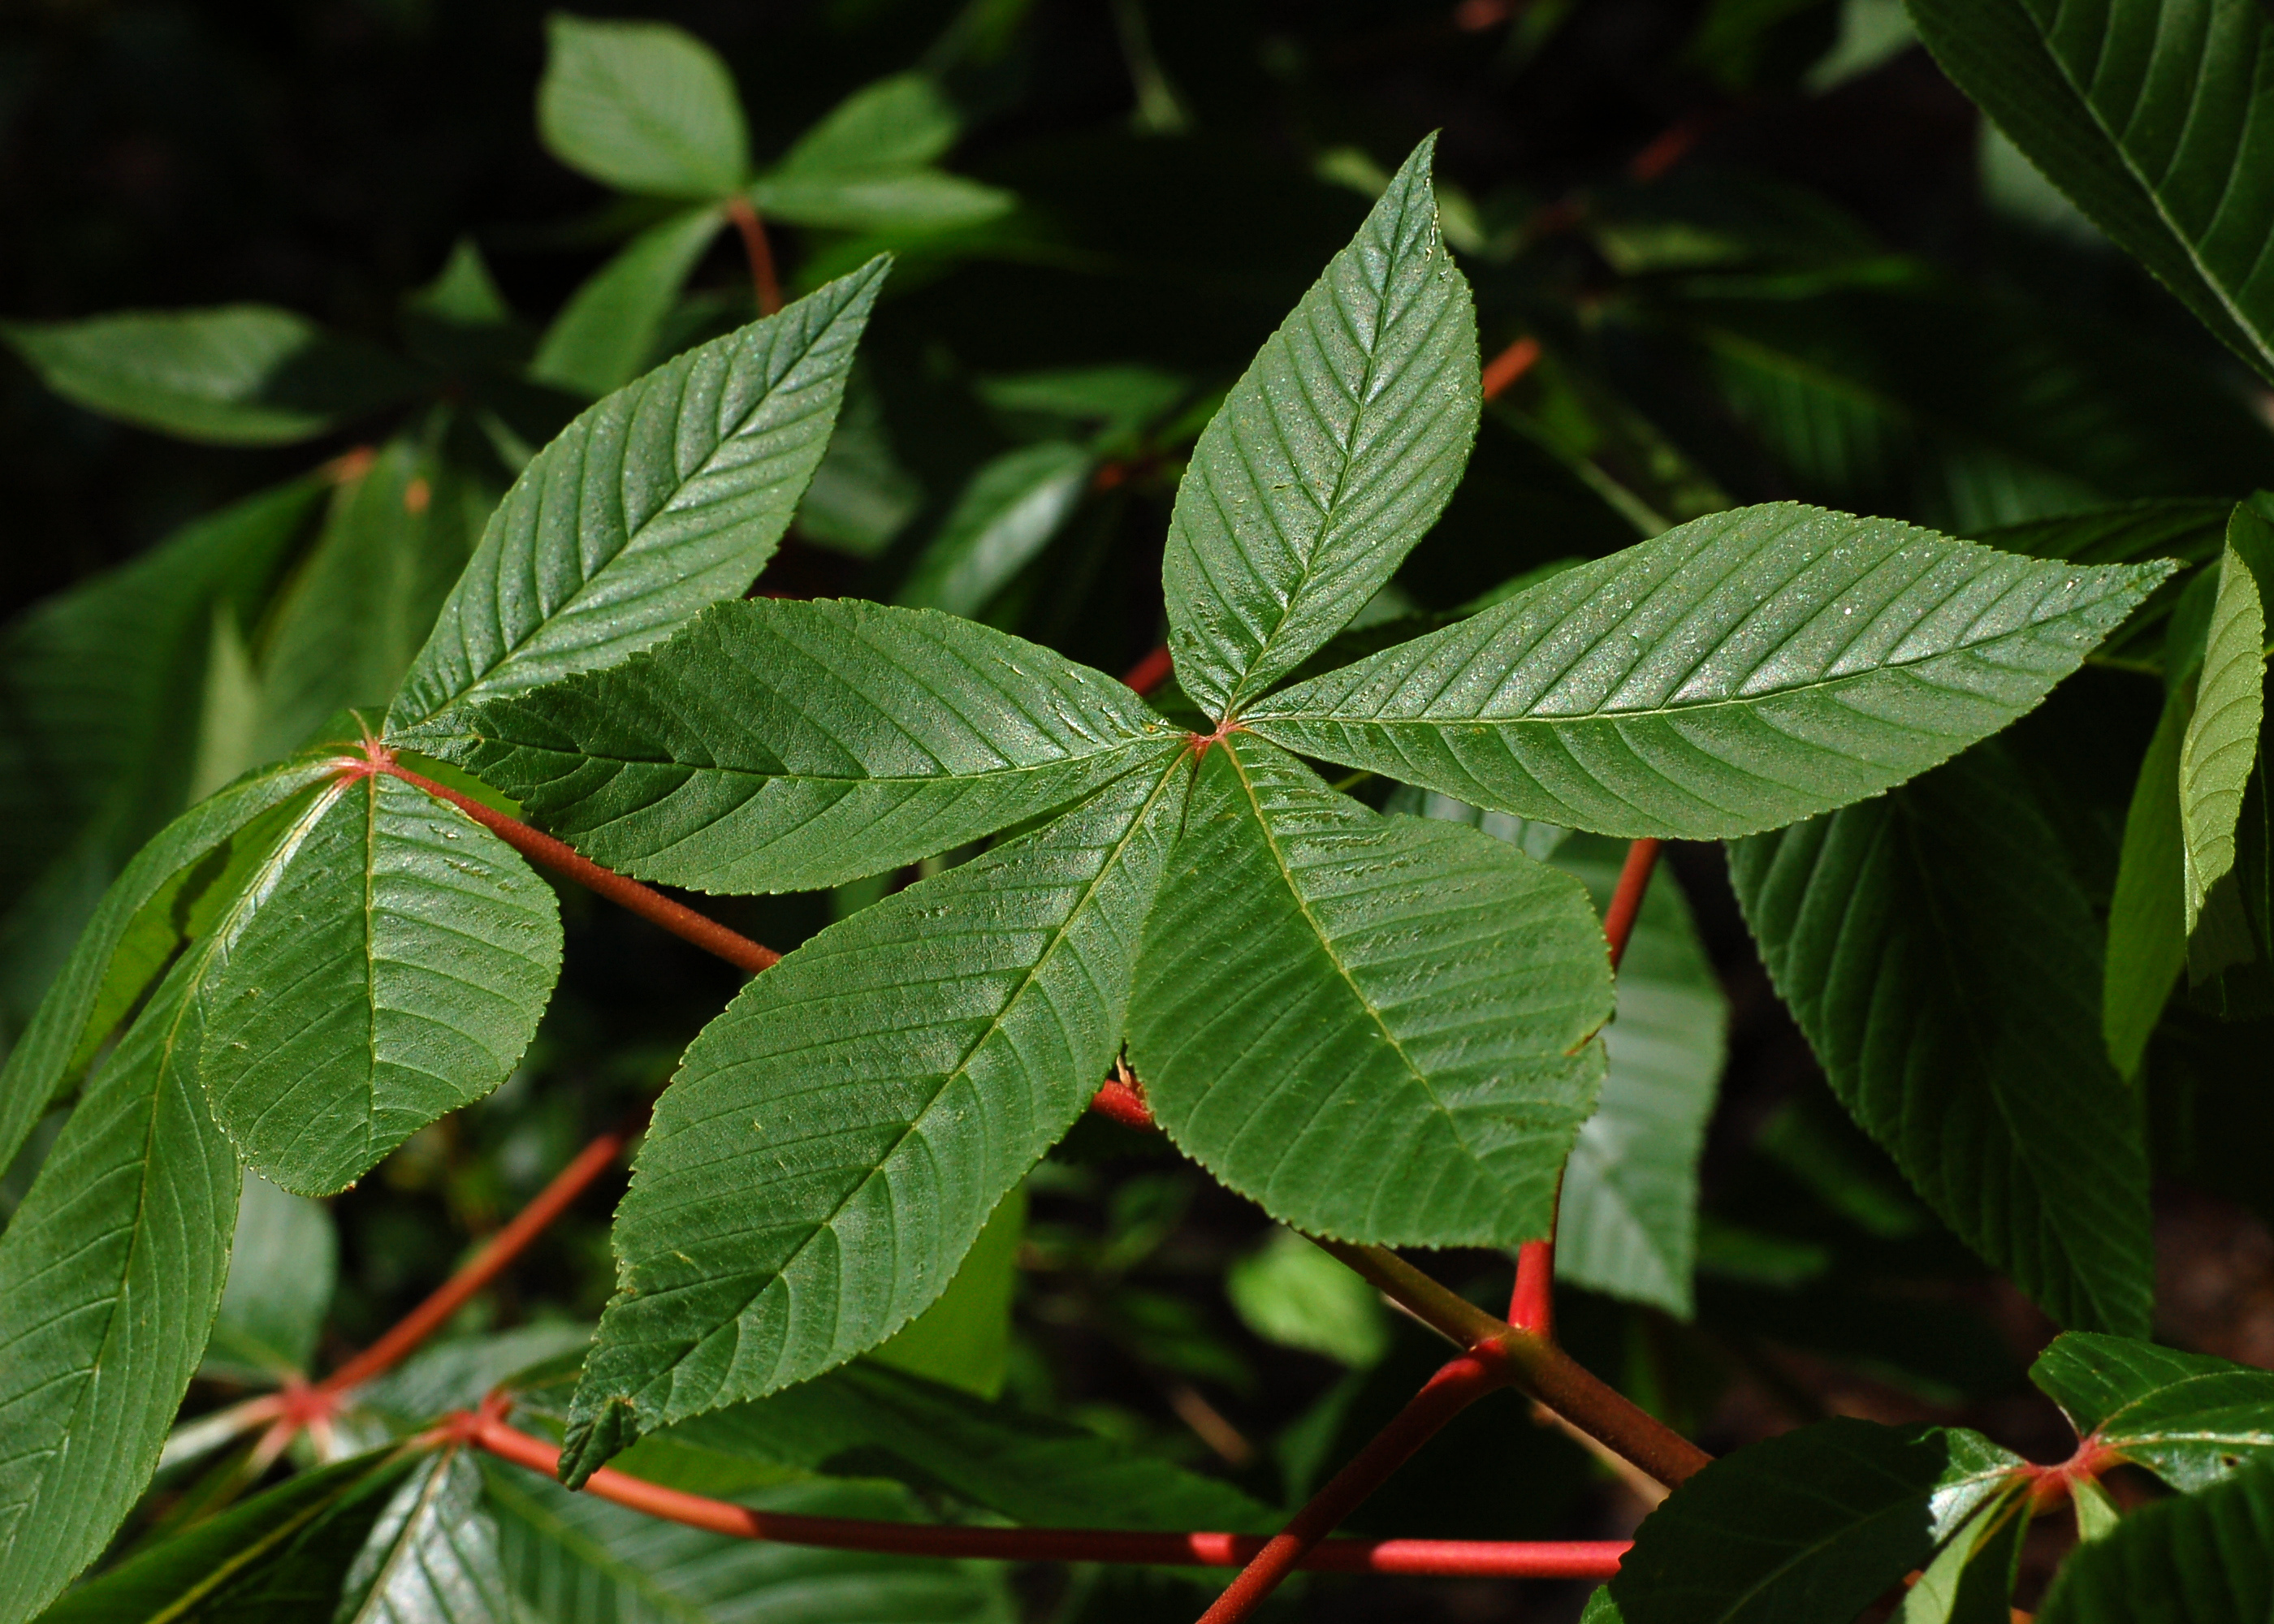 Red Buckeye Aesculus pavia Leaf Cluster 2800px